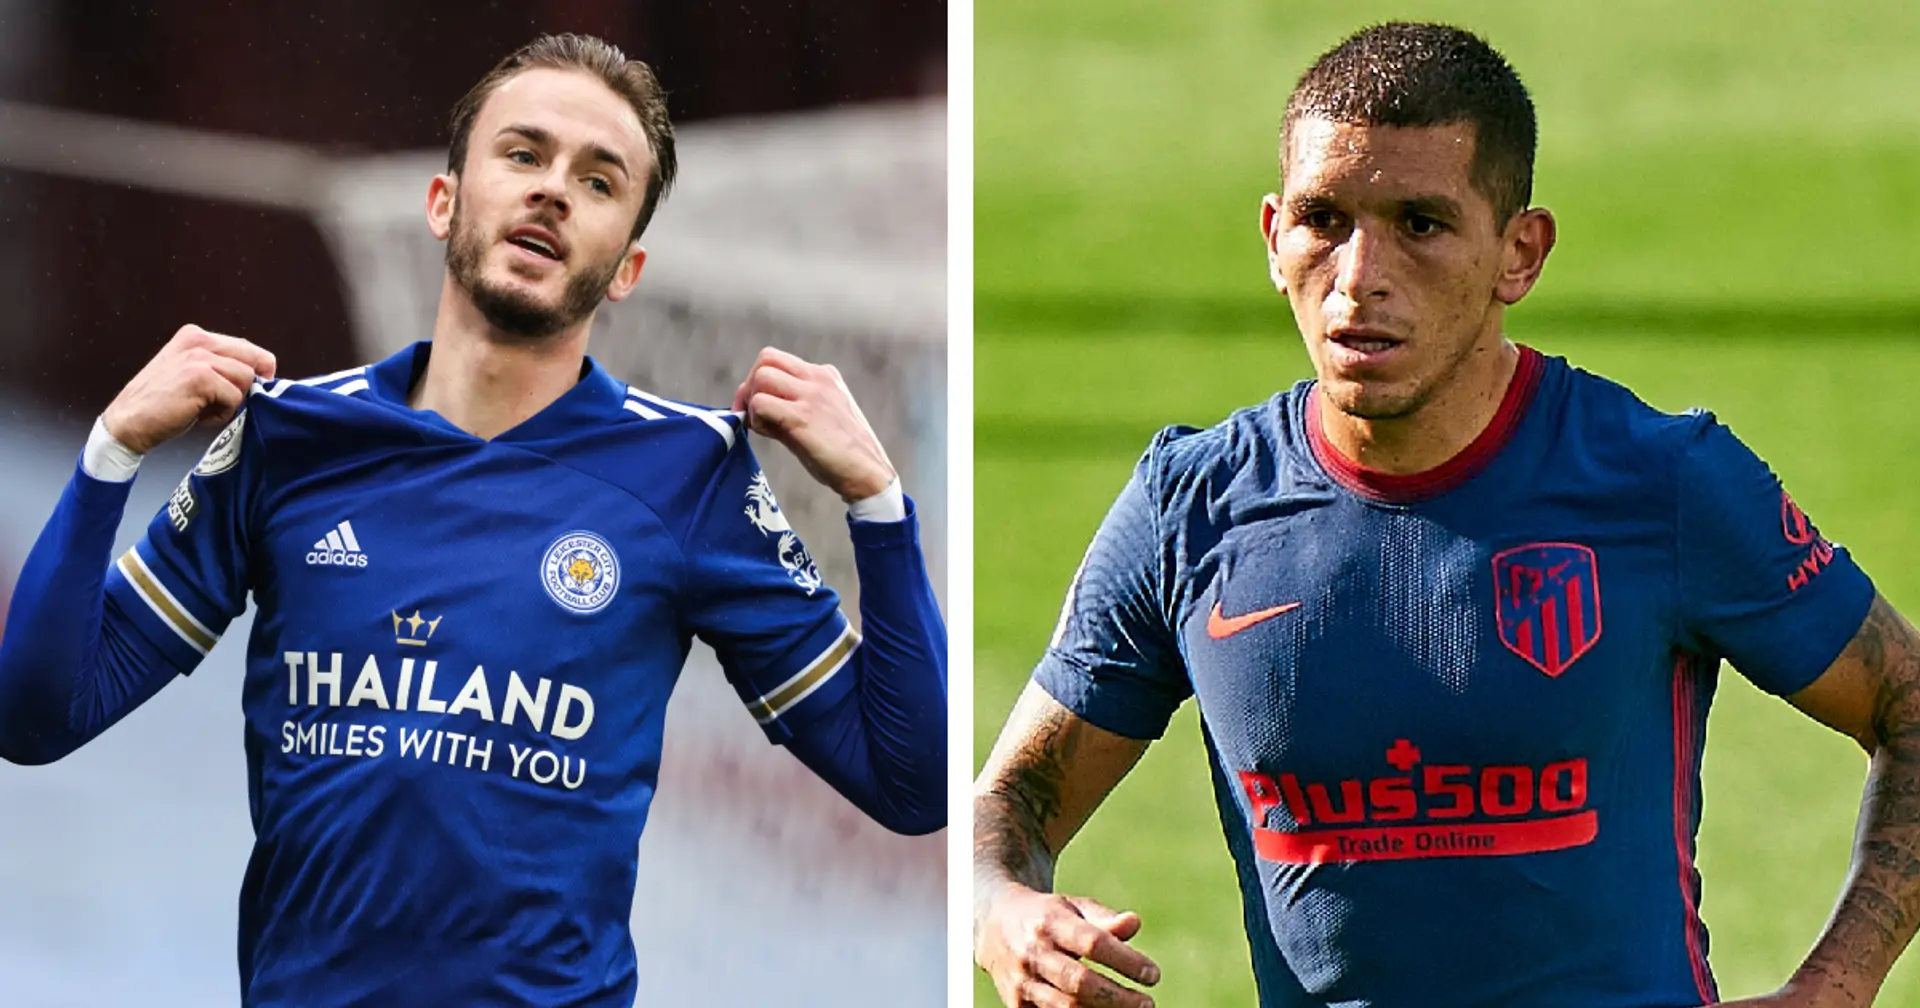 Maddison's camp 'notify' Arsenal of player's availability & 3 other stories you might've missed